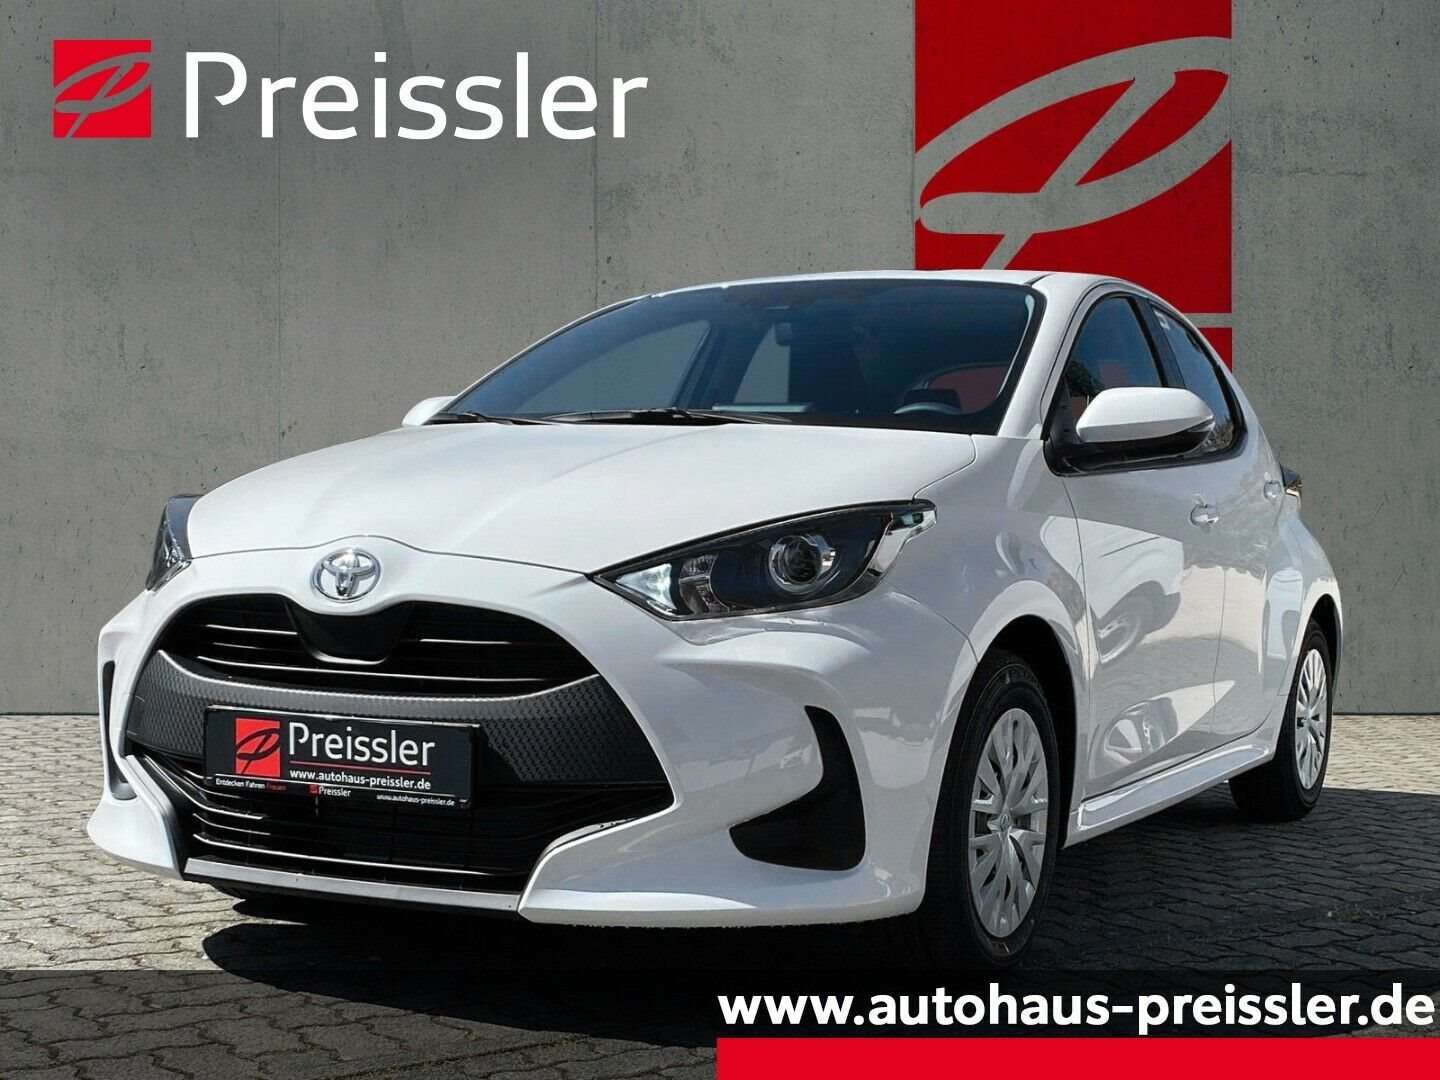 Toyota Yaris Compact in White pre-registered in Klingenberg am Main for € 18,589.-